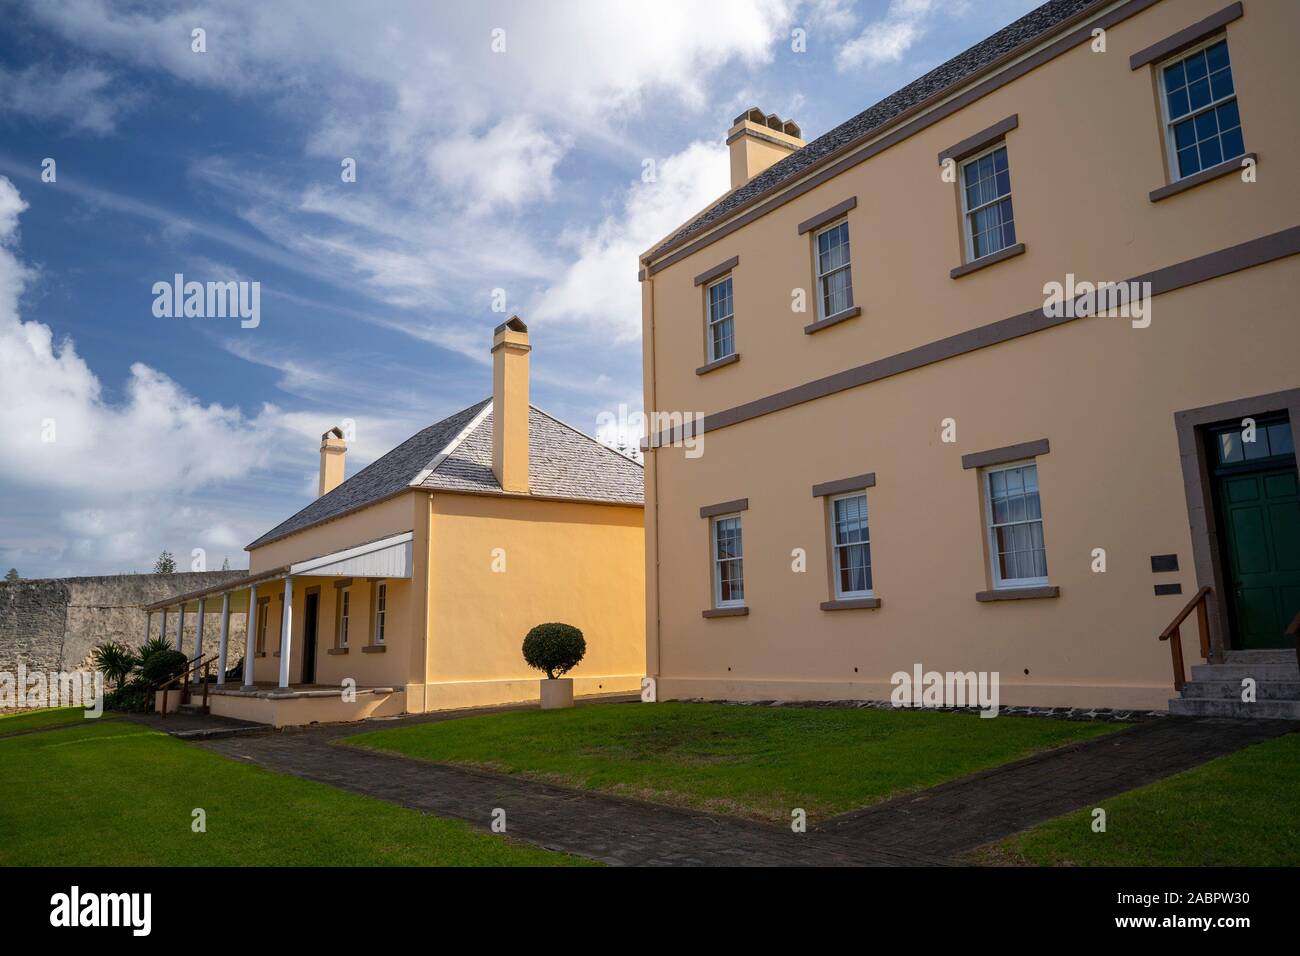 Old Military Barracks built in the 1830s in the Kingston and Arthur’s Vale Historic Area, one of the eleven sites making up the Australian Convict Sit Stock Photo